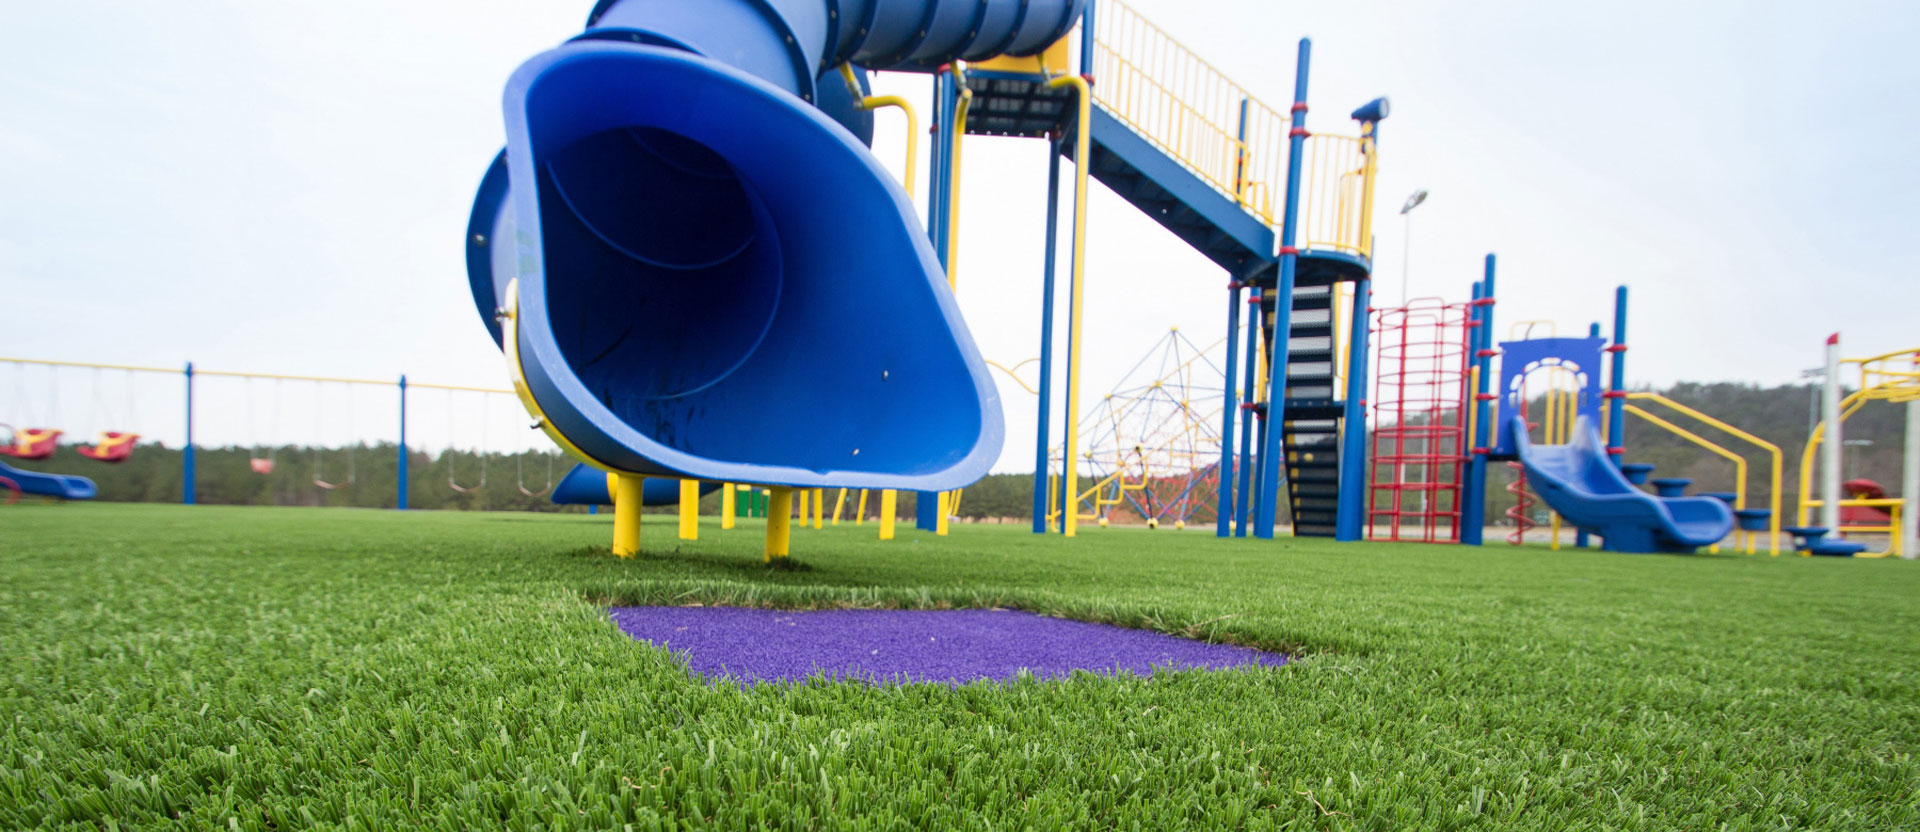 Artificial playground grass with blue slide